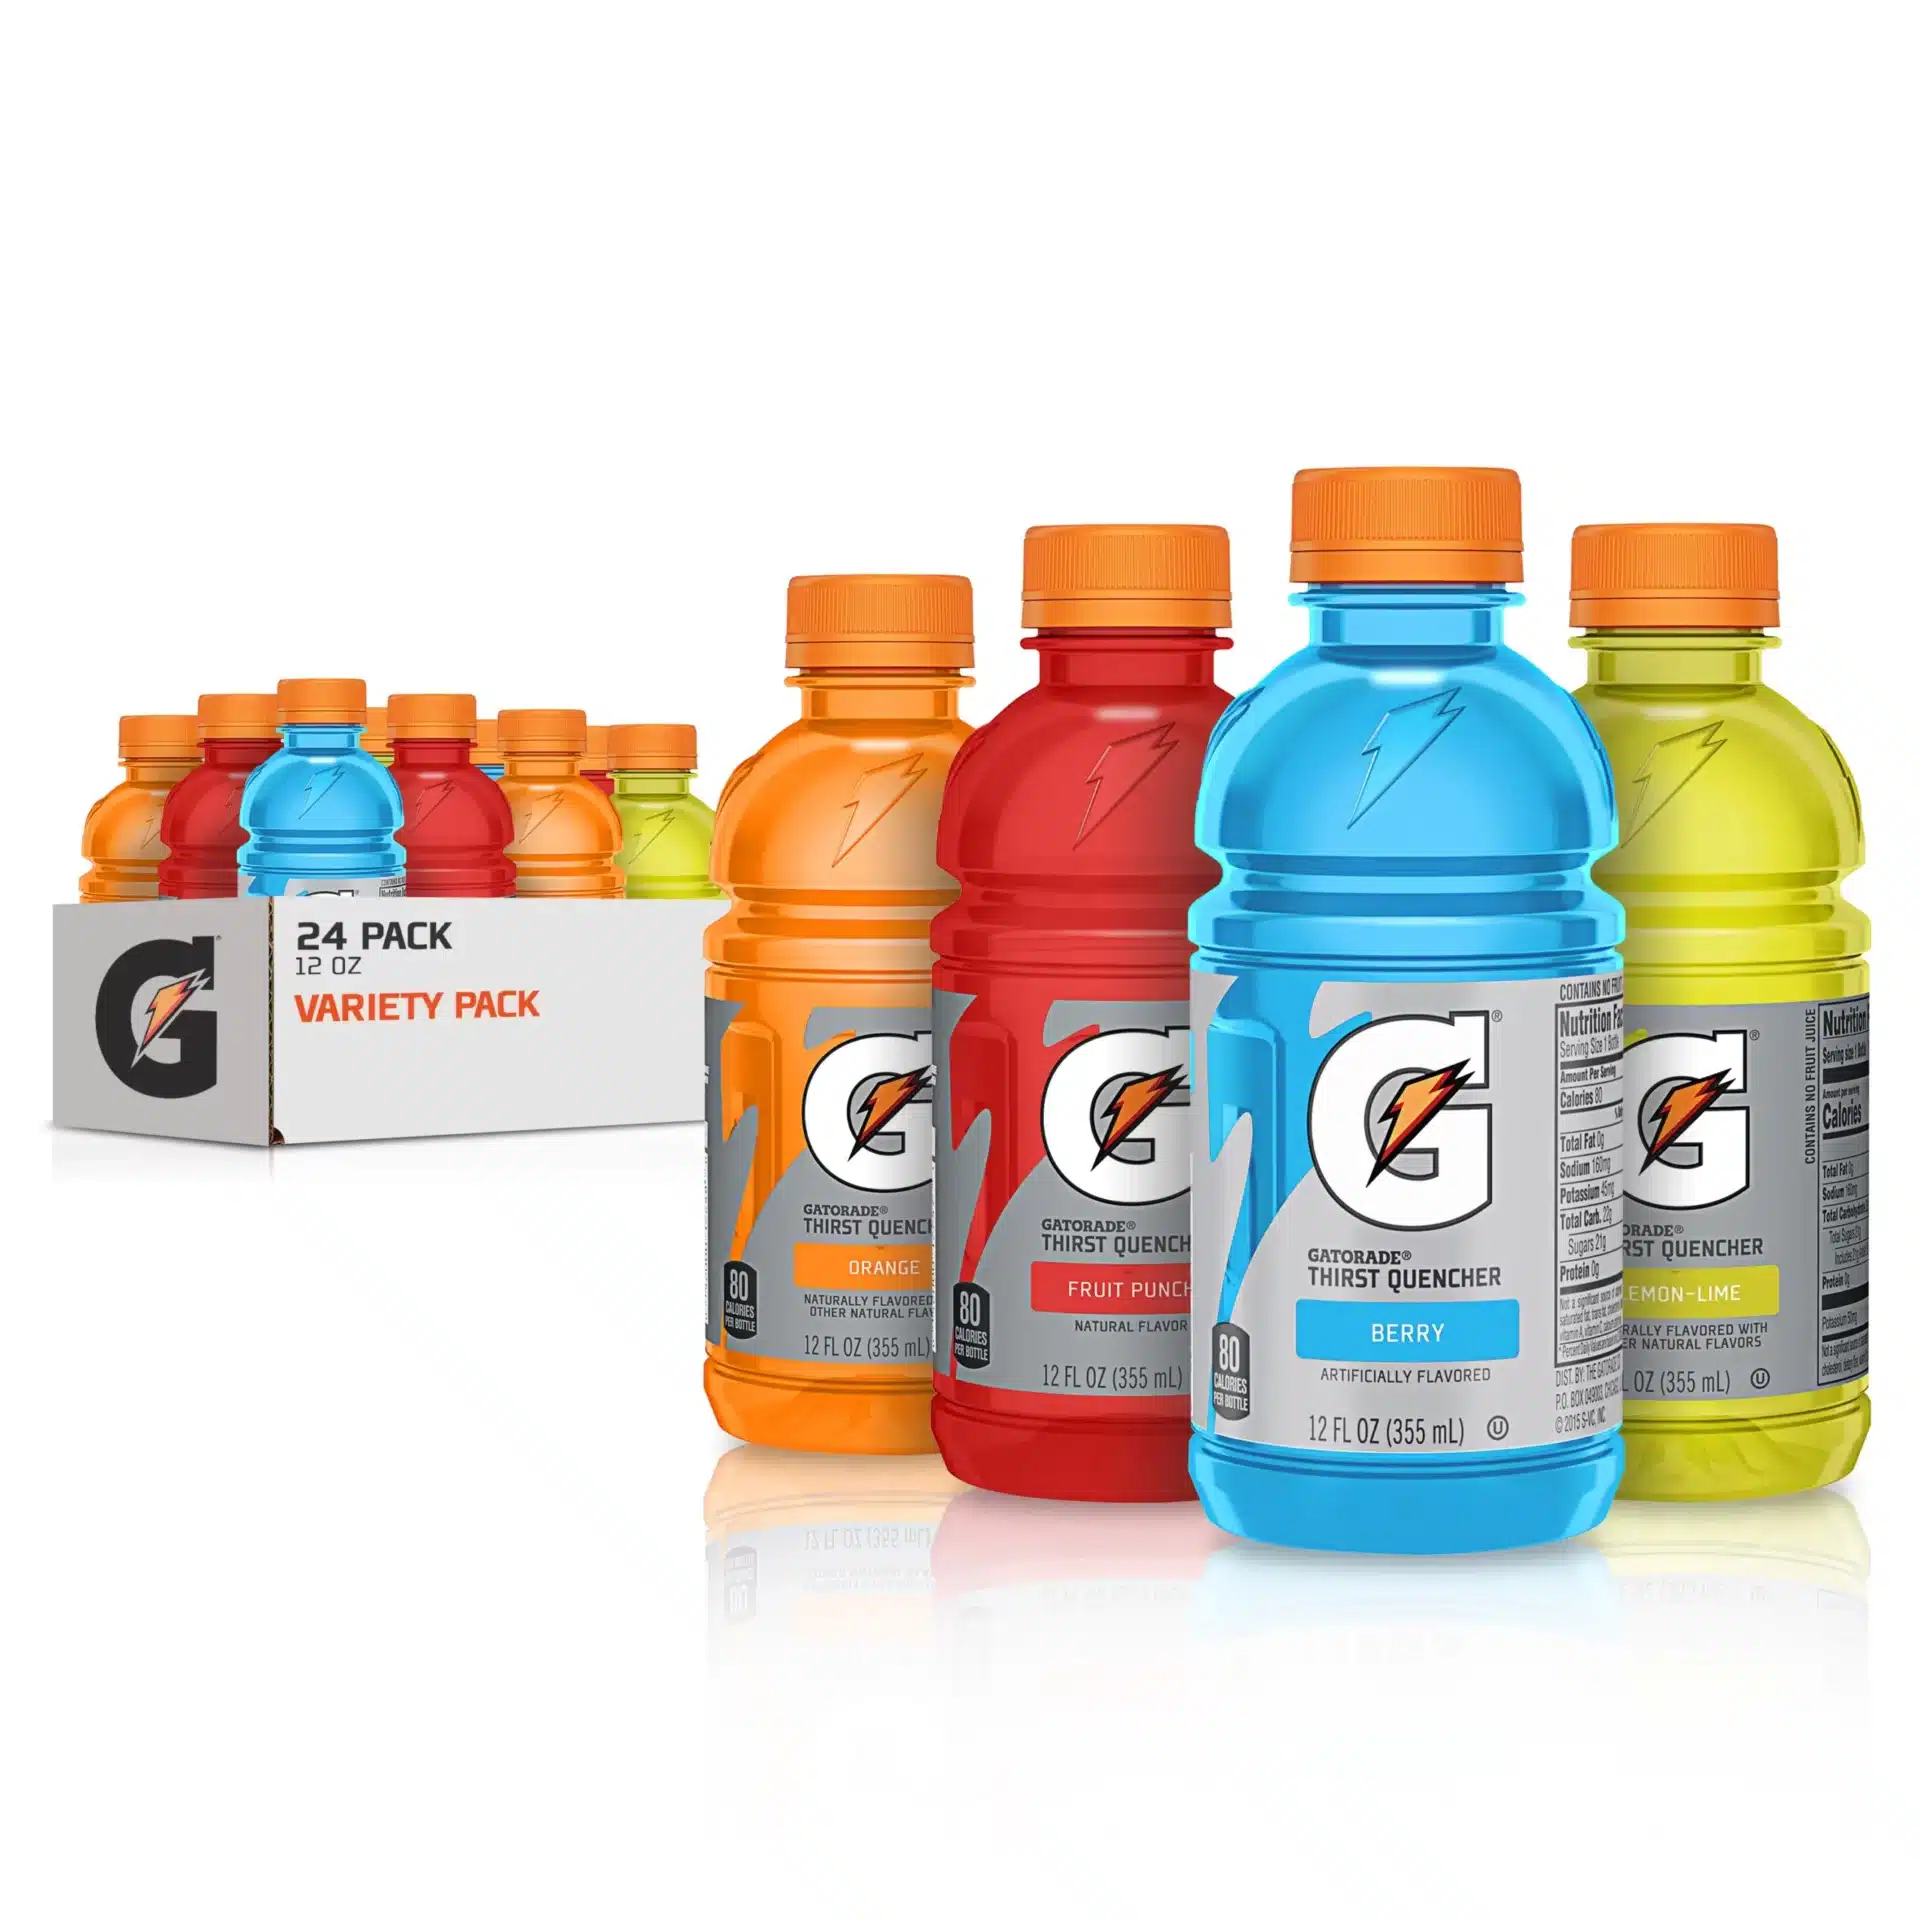 Can Gatorade Change The Color Of Your Poop?